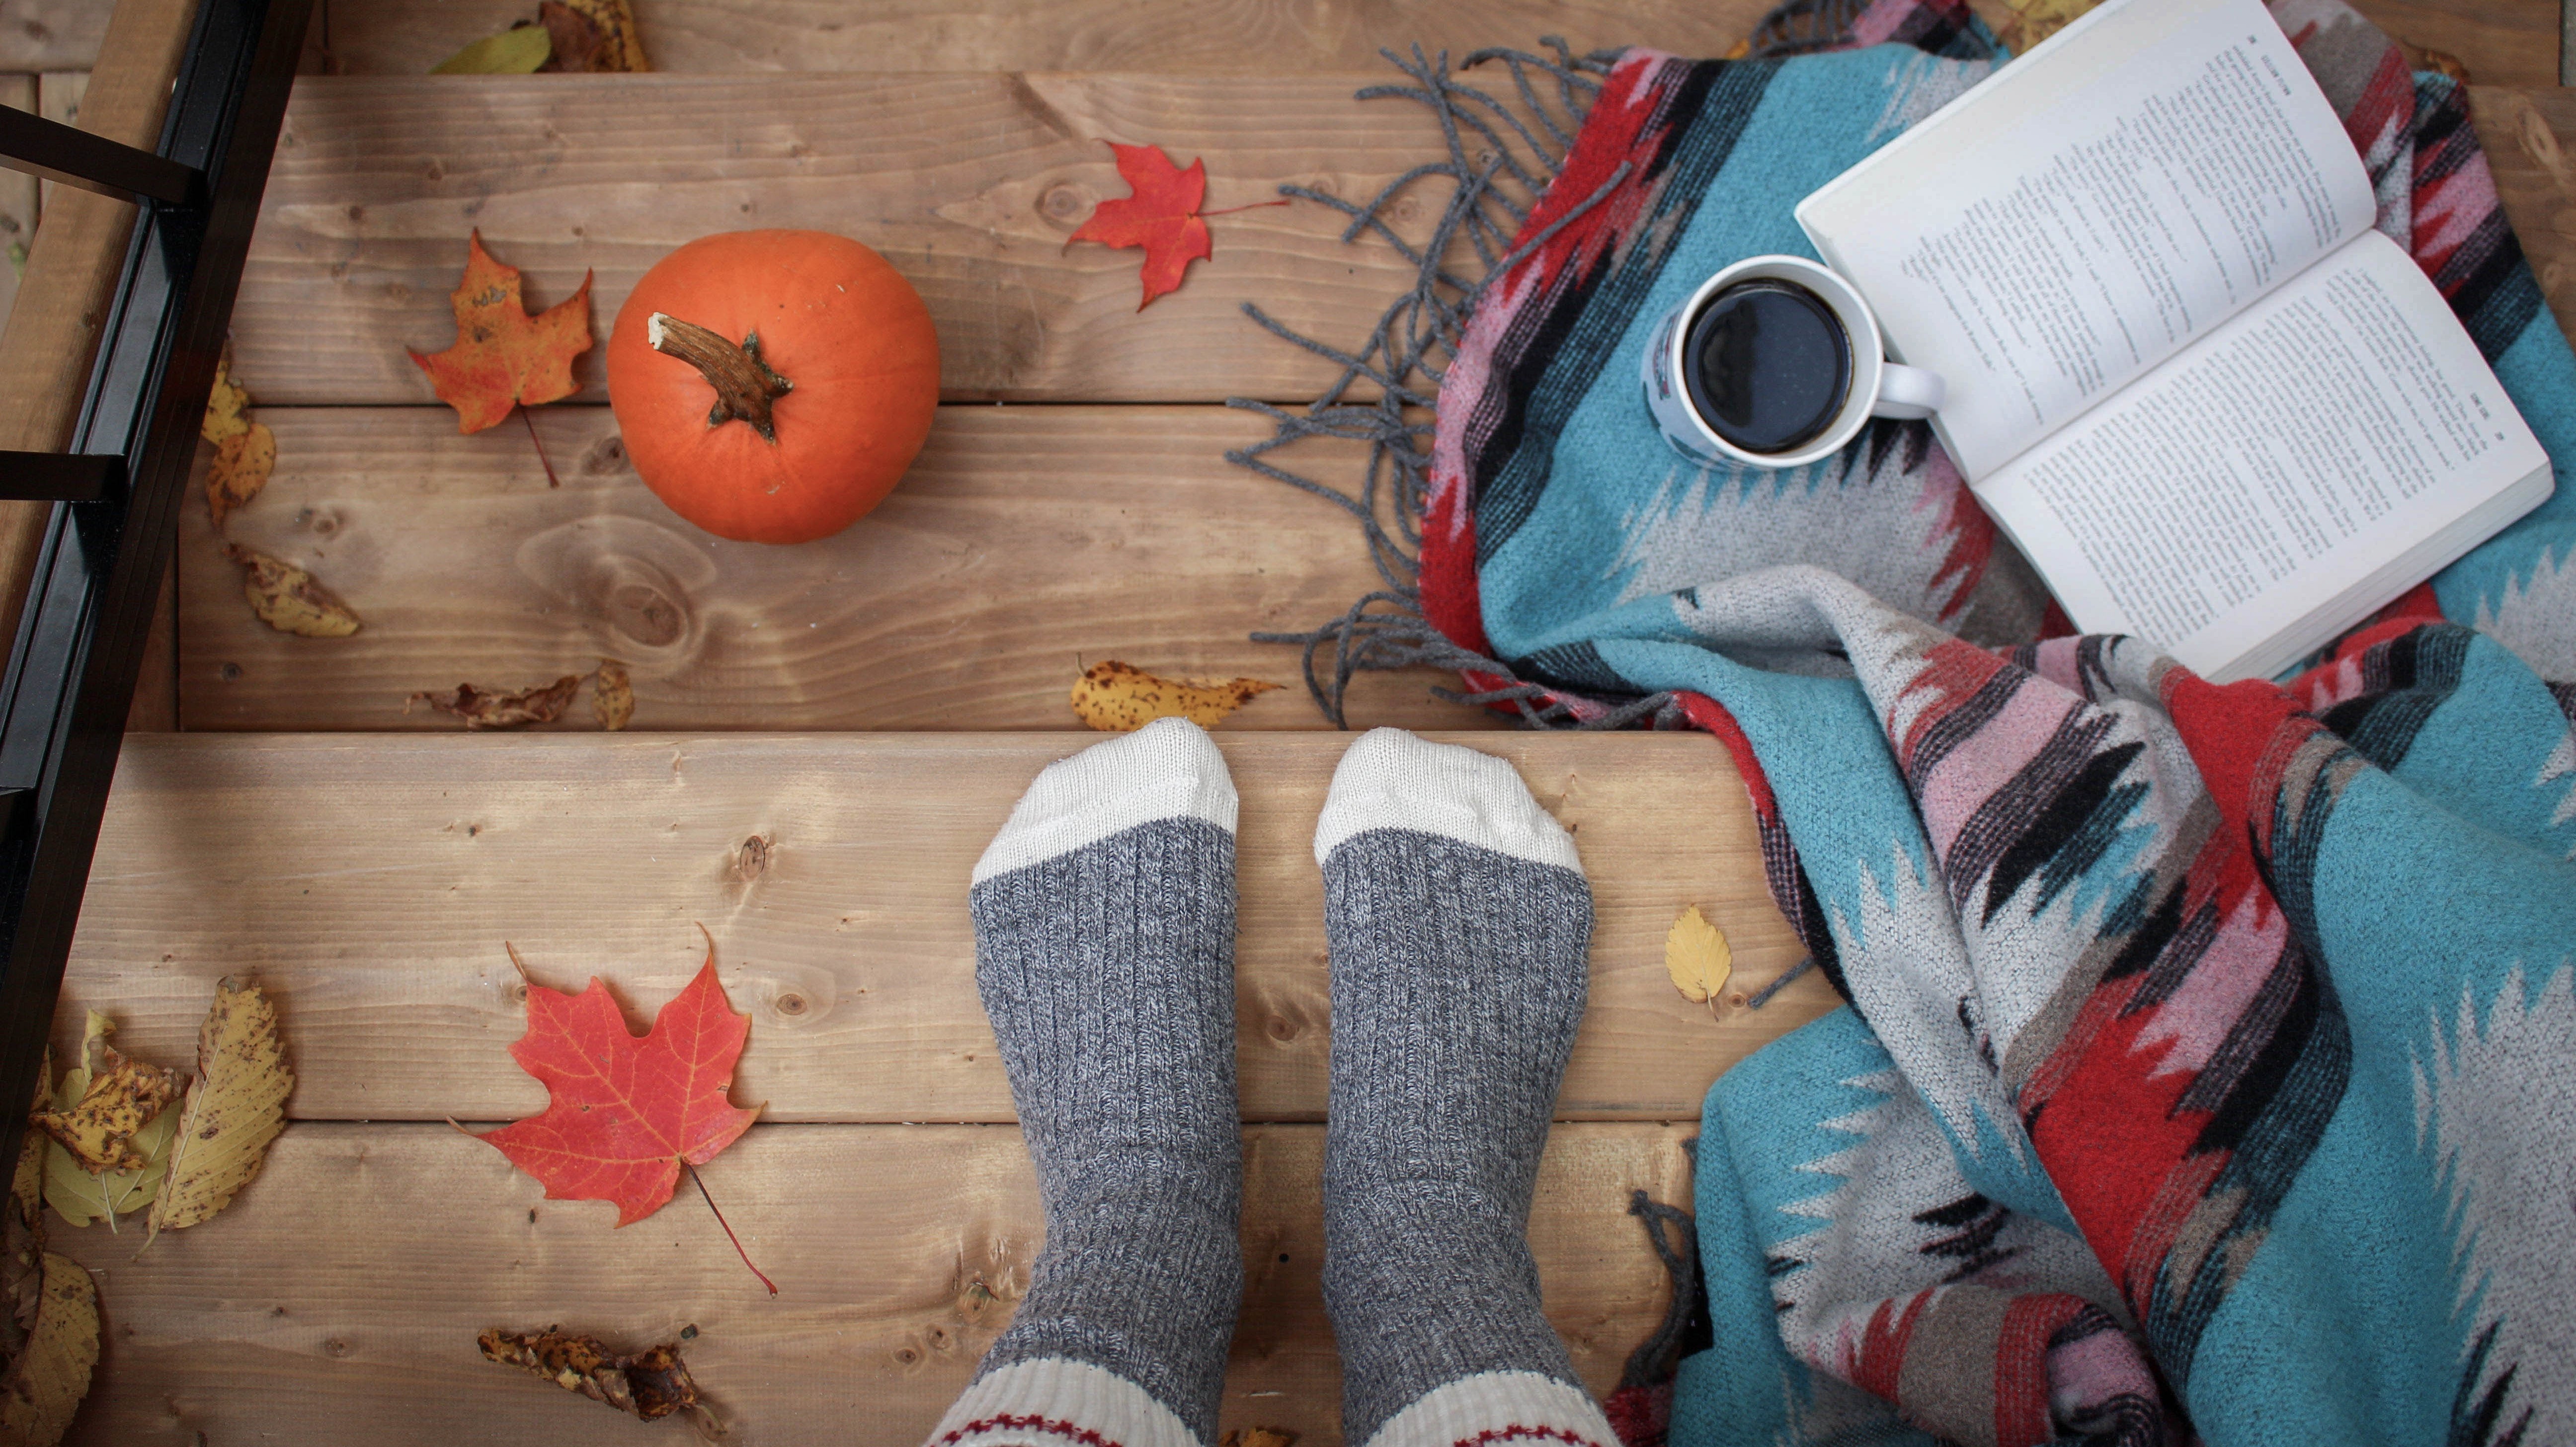 Falling into Fun: Fun activities this autumn that'll leaf you smiling!